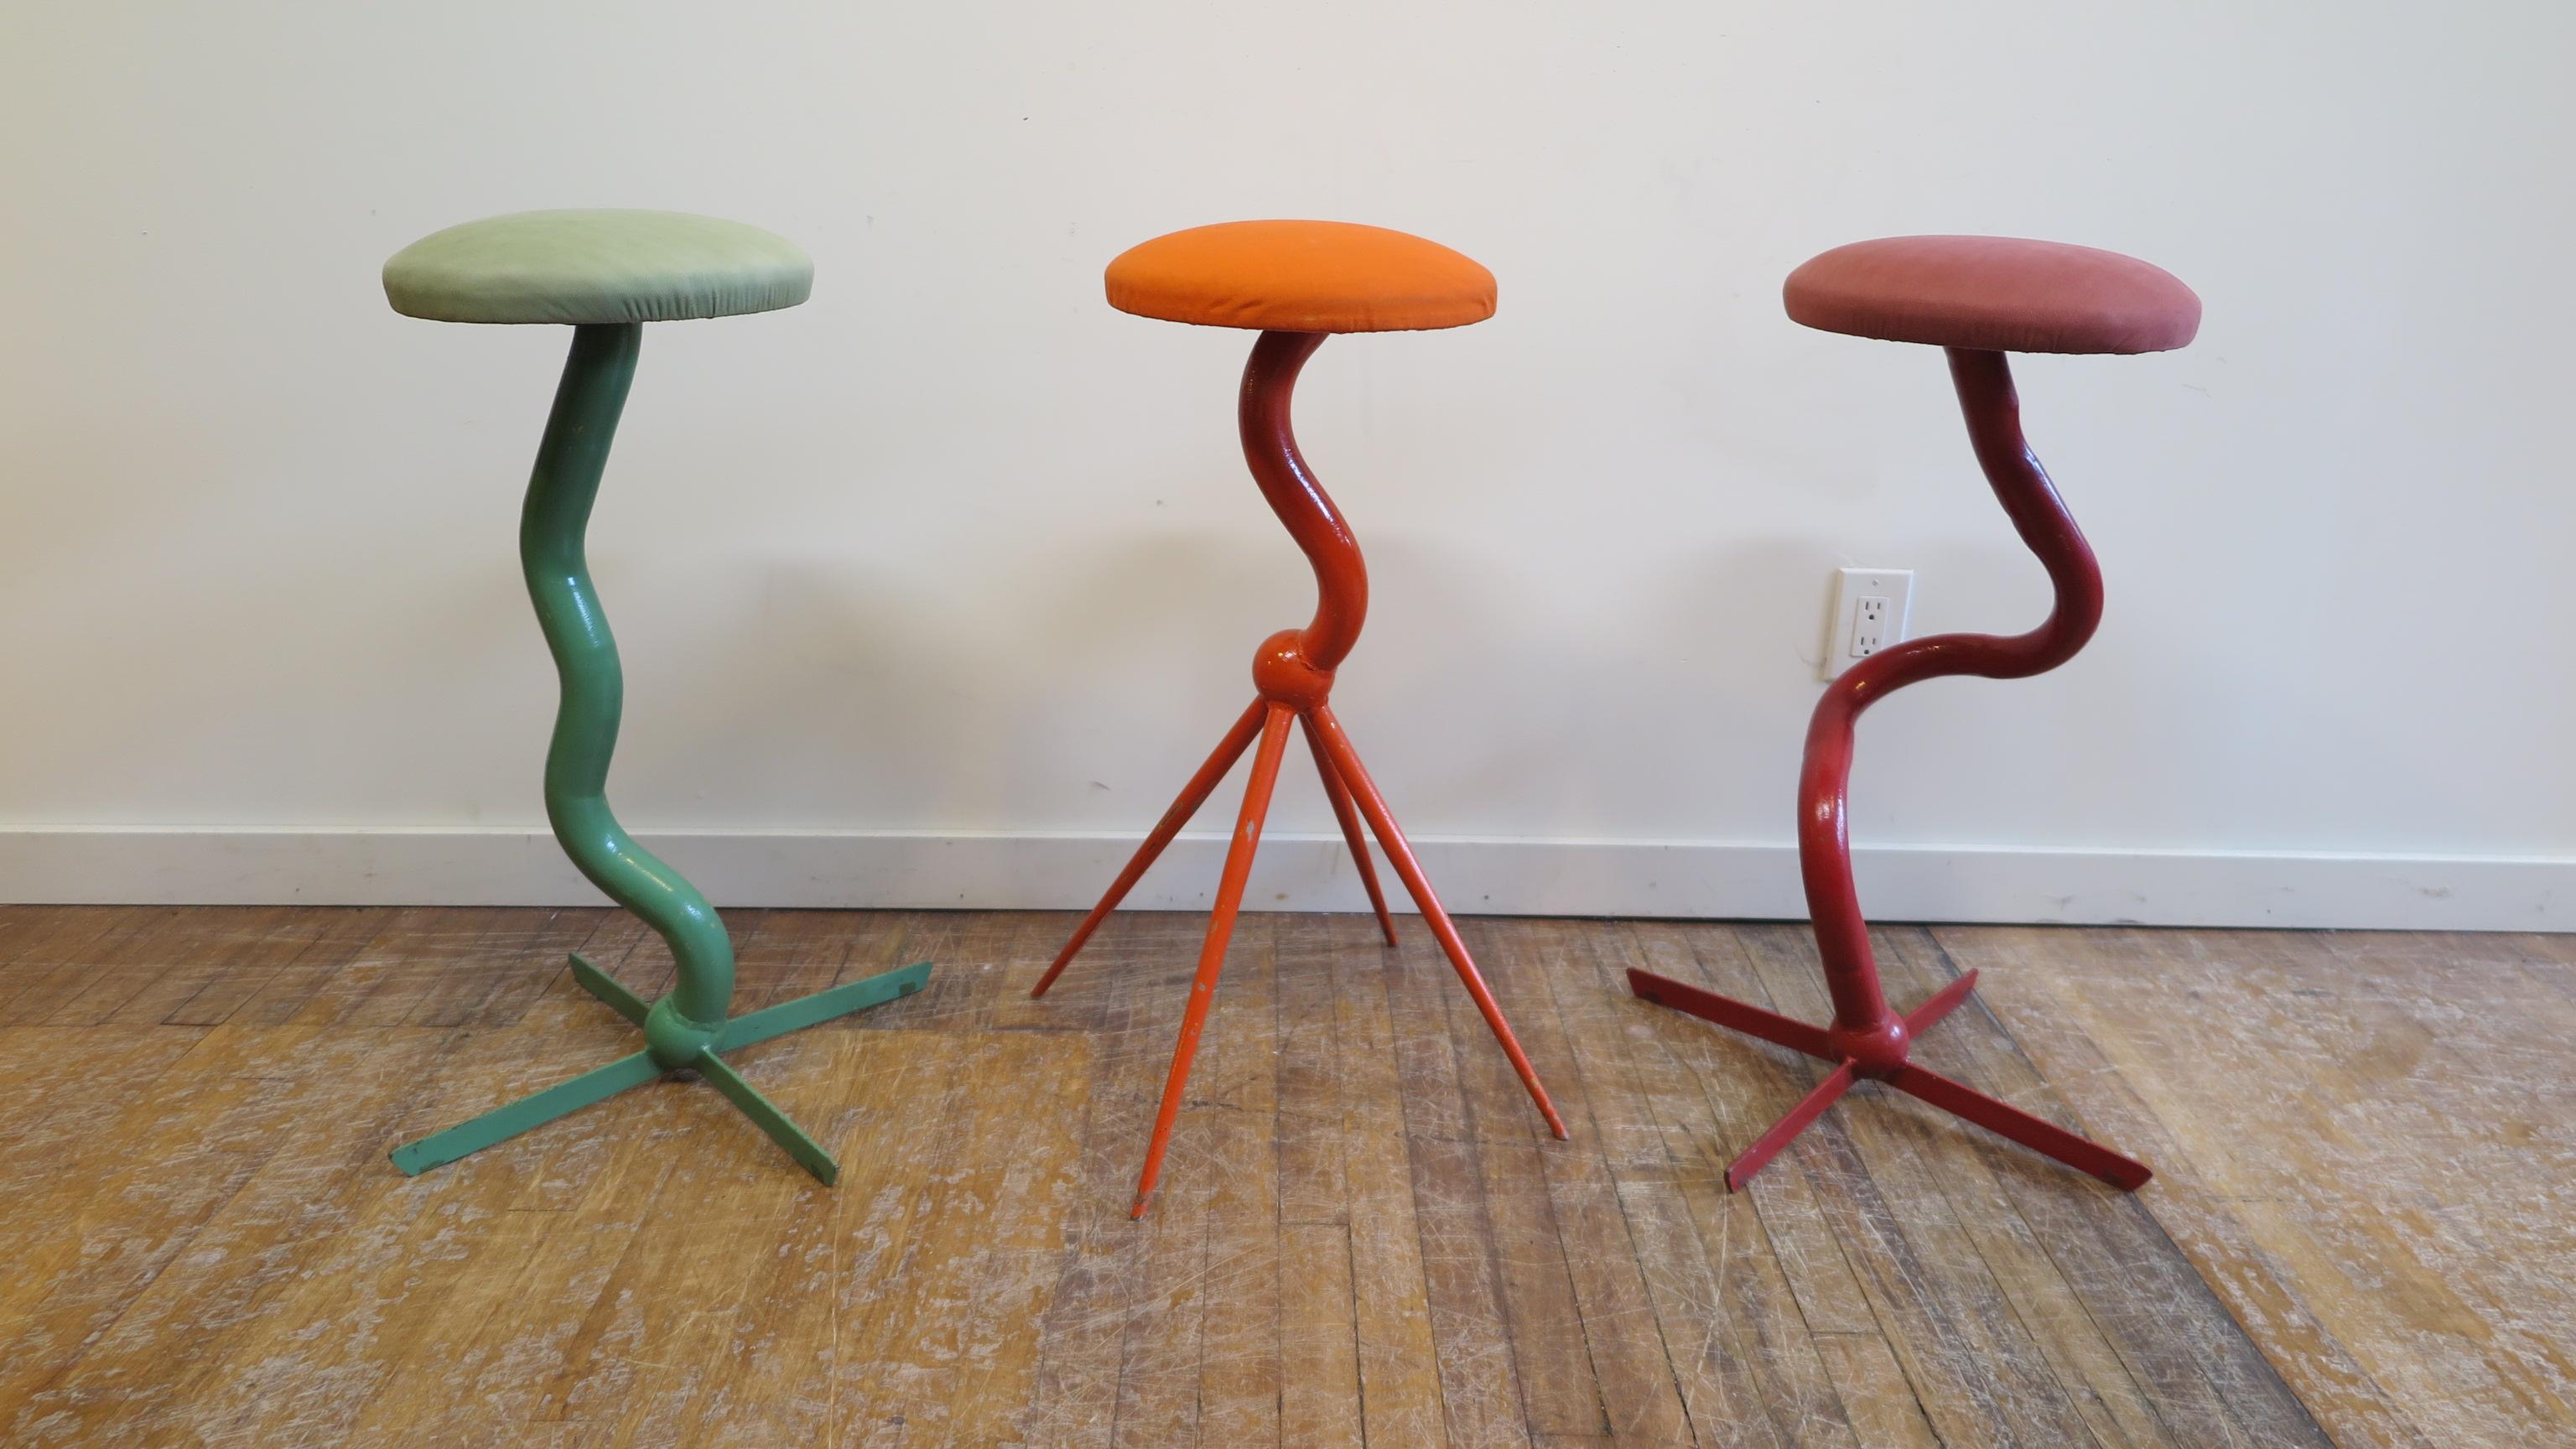 Set of three bar stools by Patrice Goujon. Stools of steel tubing coated with enamel paint. Each stool is signed and numbered as #1, #2, #3, P. Goujon, France 1990. Very strong and sturdy for every day use. Good condition. Fabric is faded metal